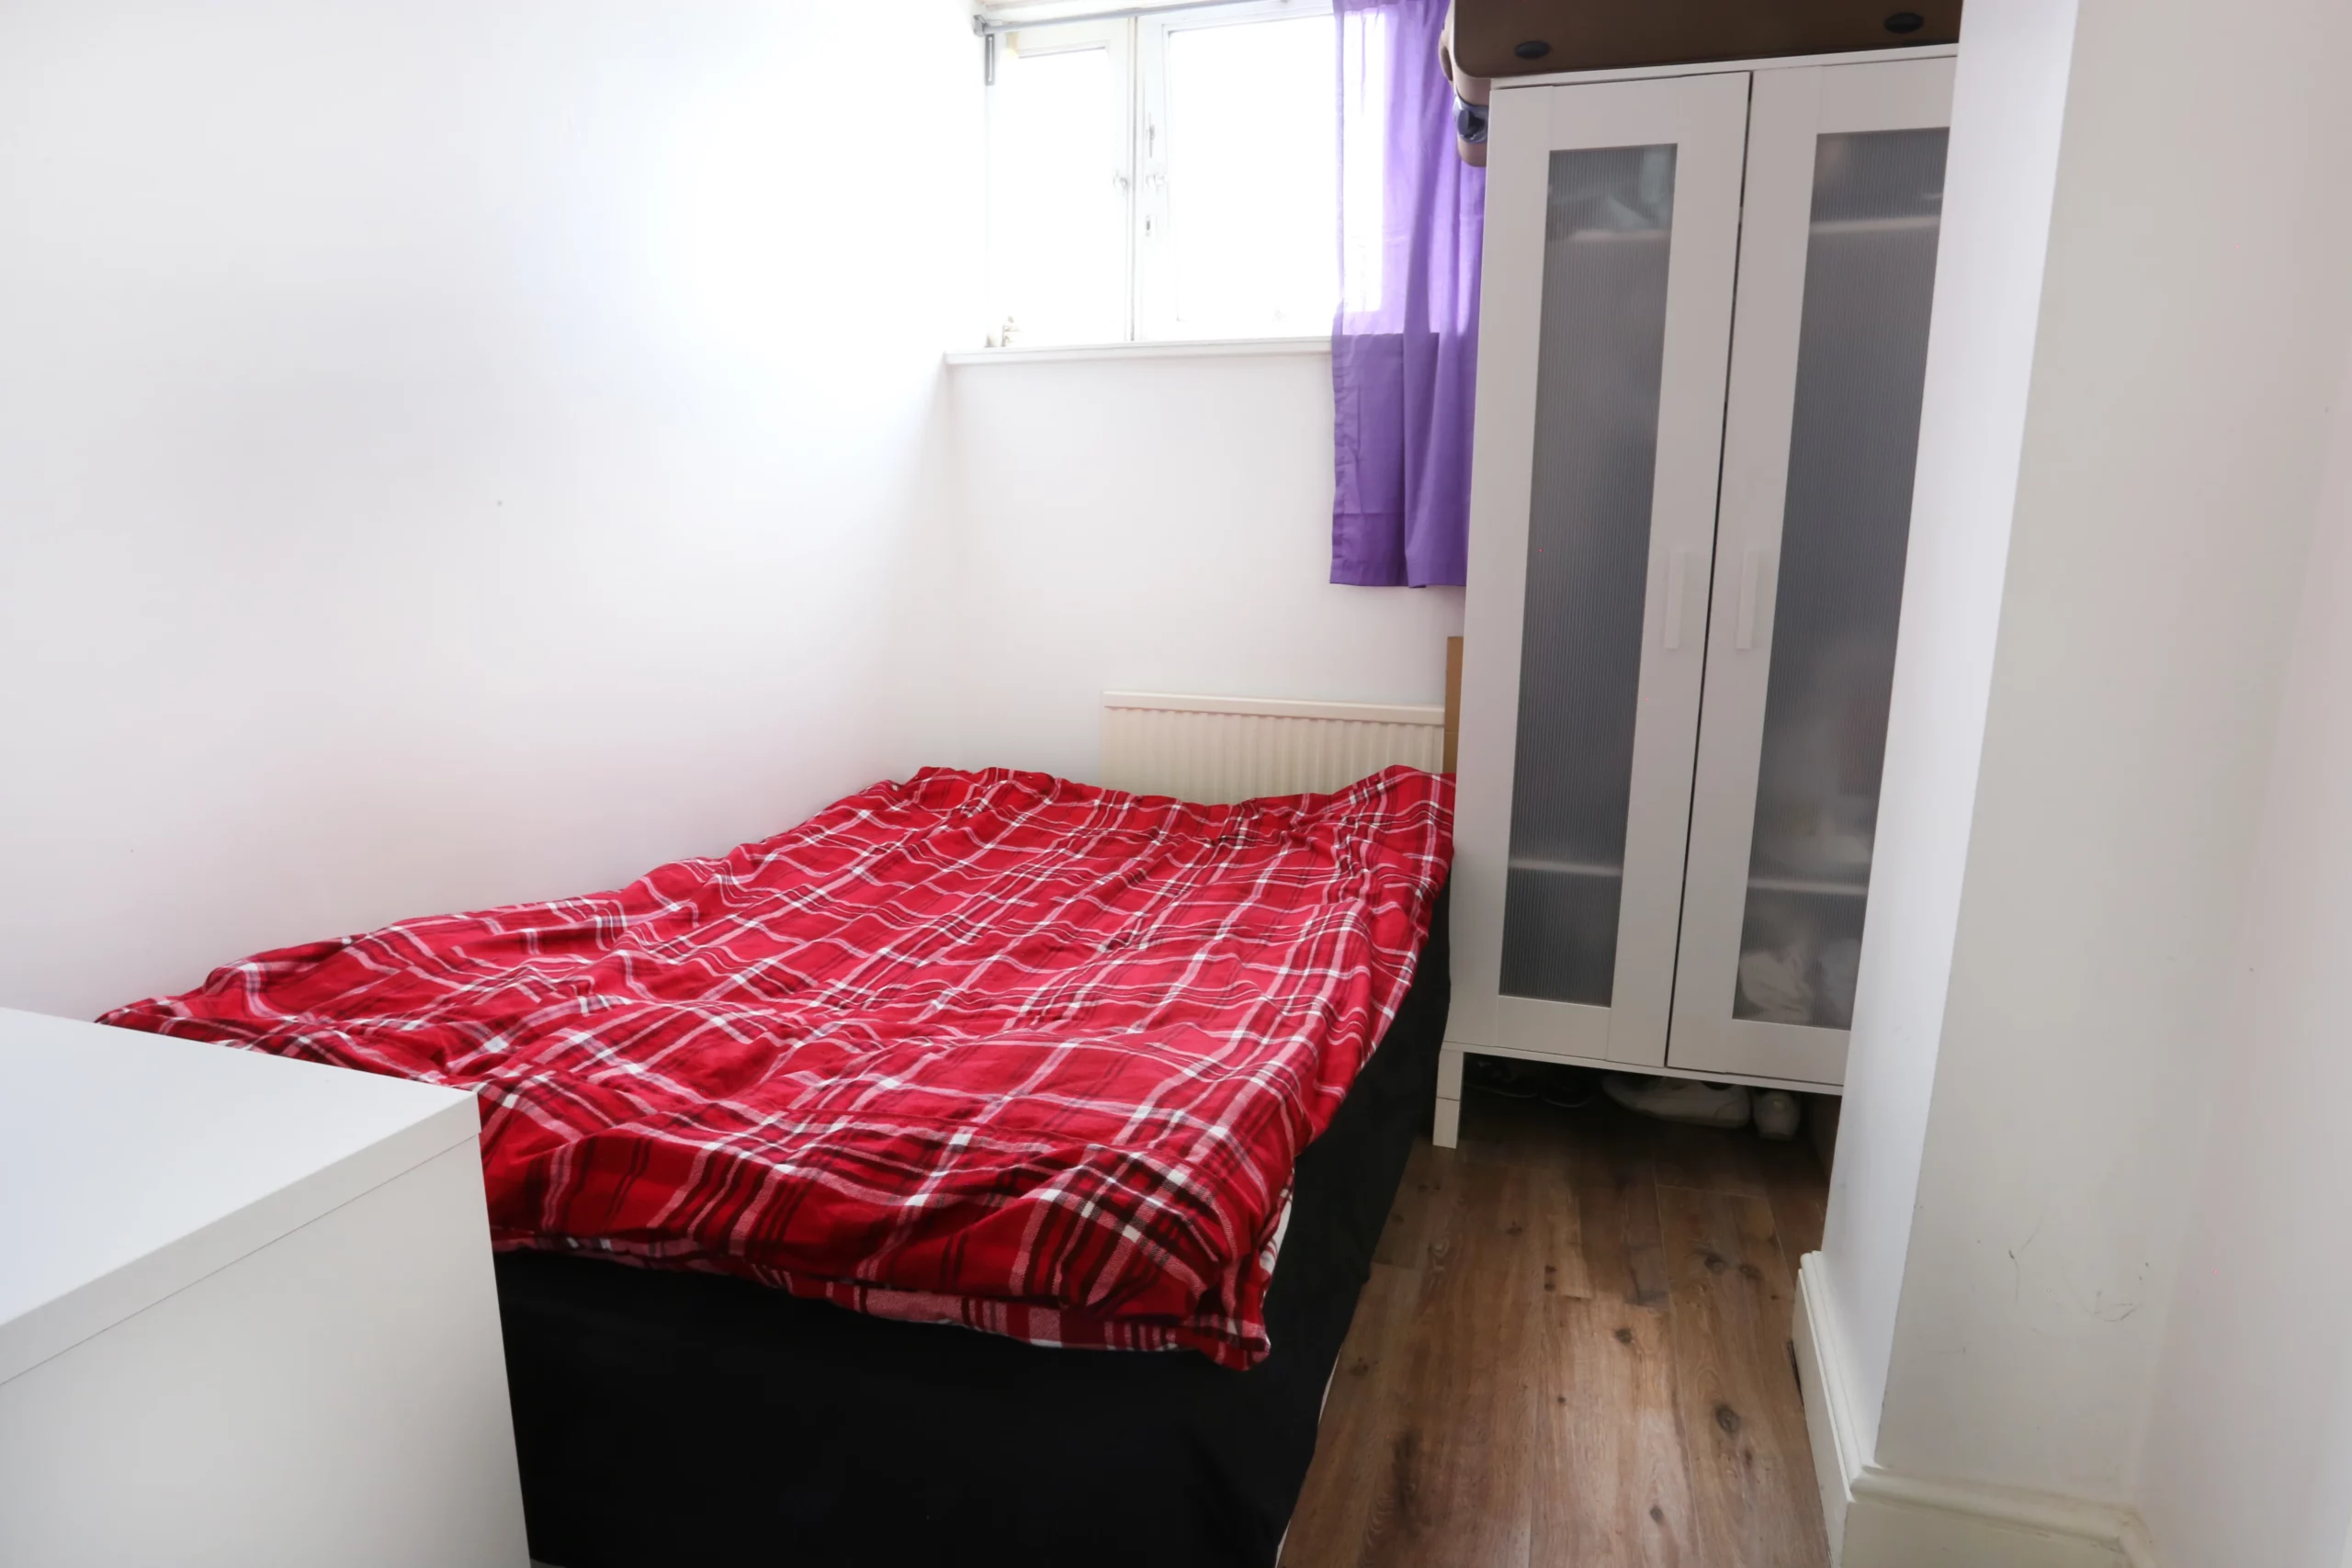 Four Bedroom Flat located in Stepney Green